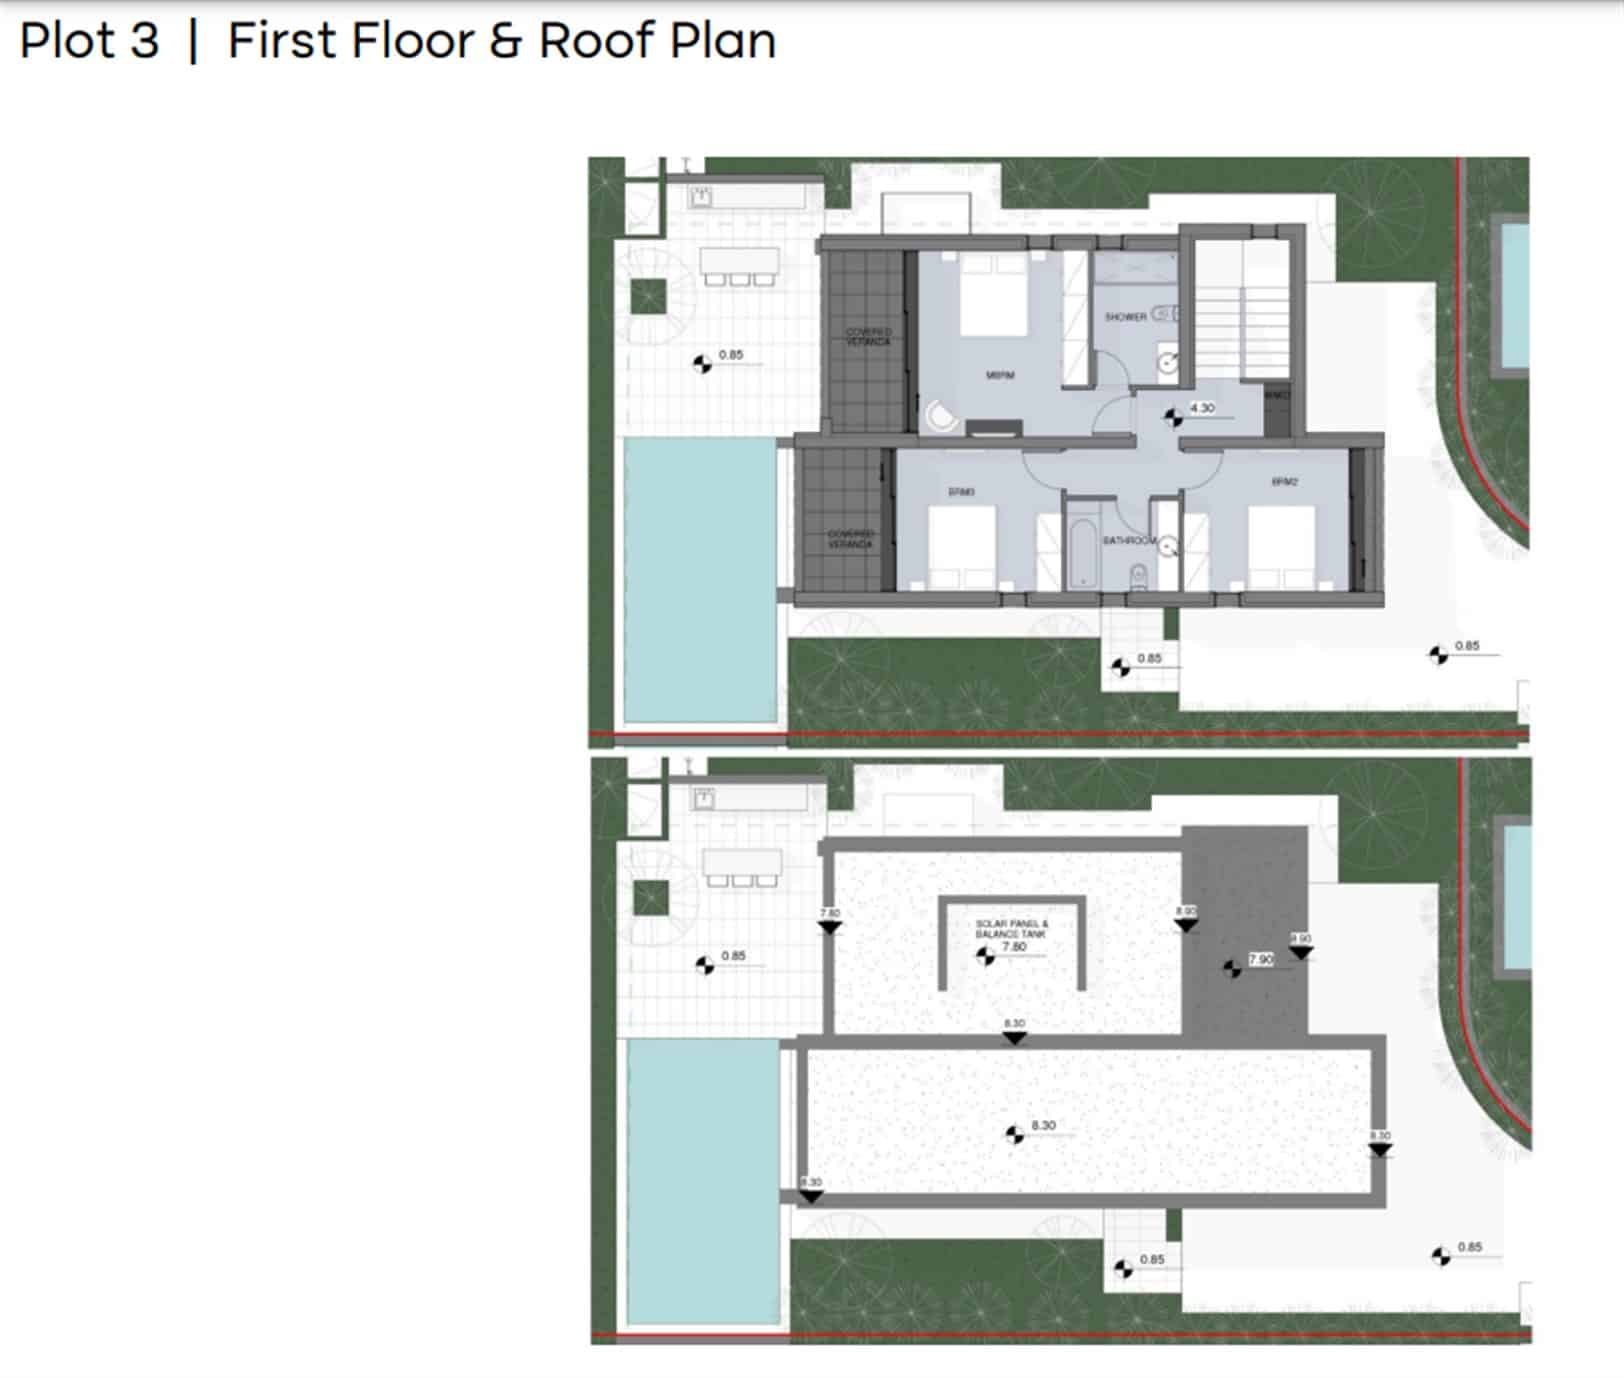 Plot 3 1st Floor and Roof Plan